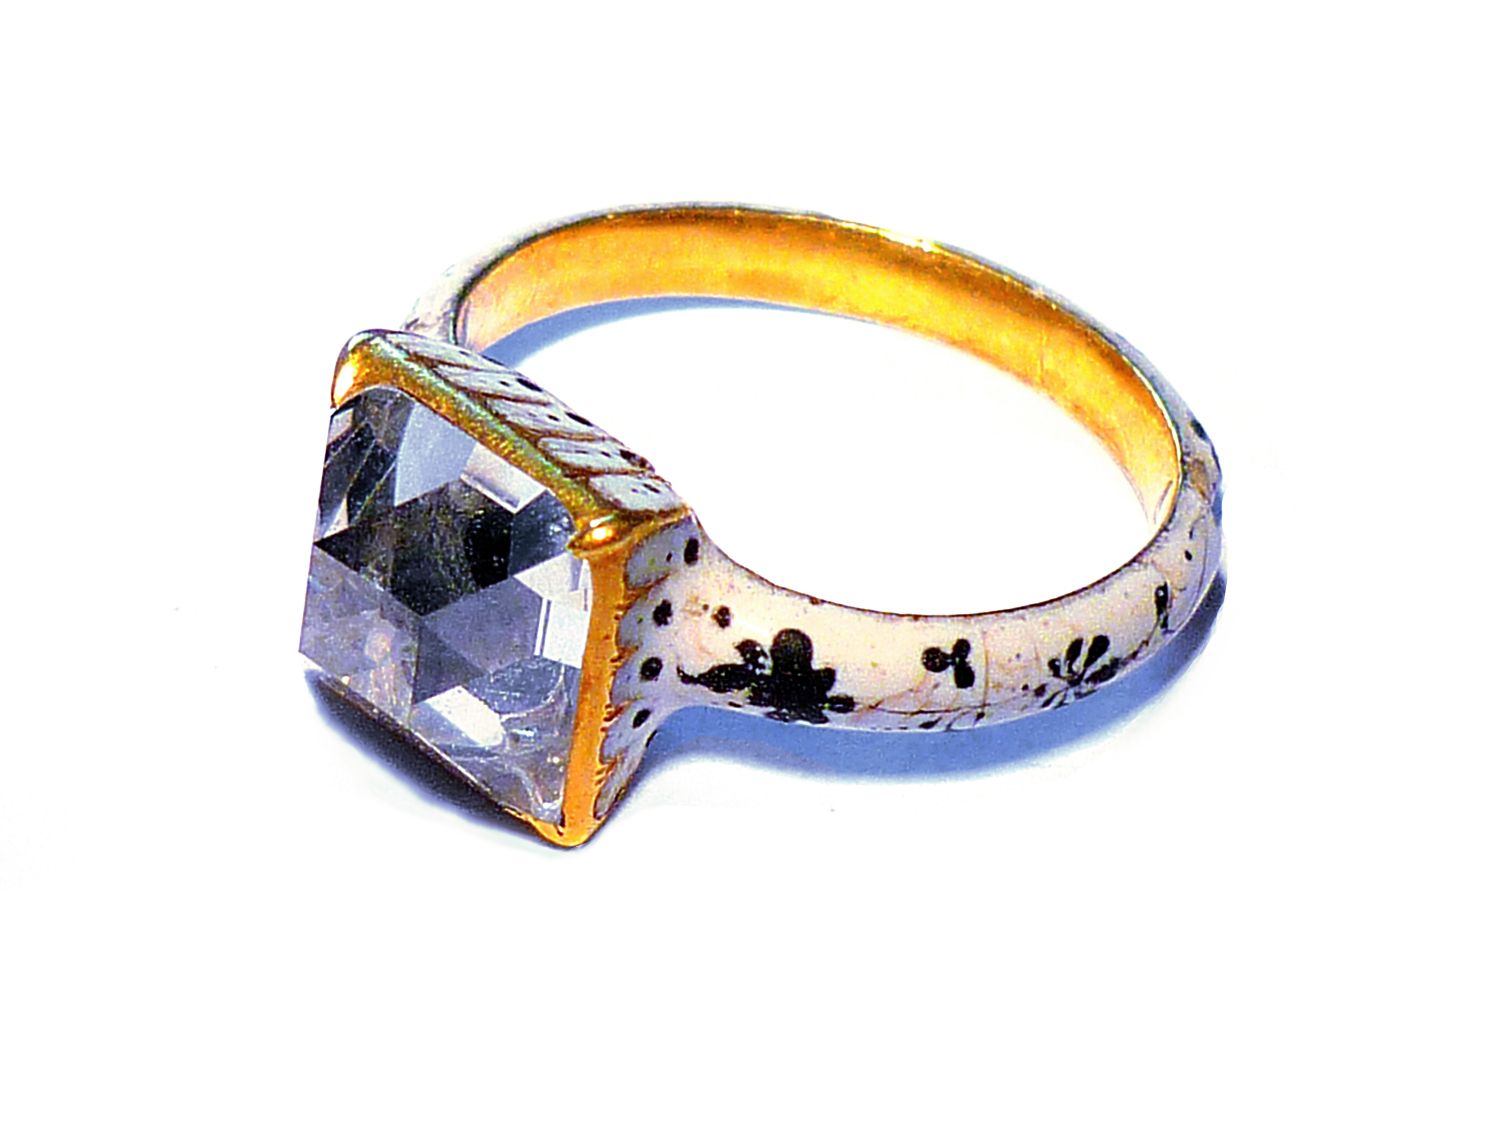 A Multifaceted History – Jewelry Connoisseur Regarding Newest Multifaceted Rings (View 7 of 25)